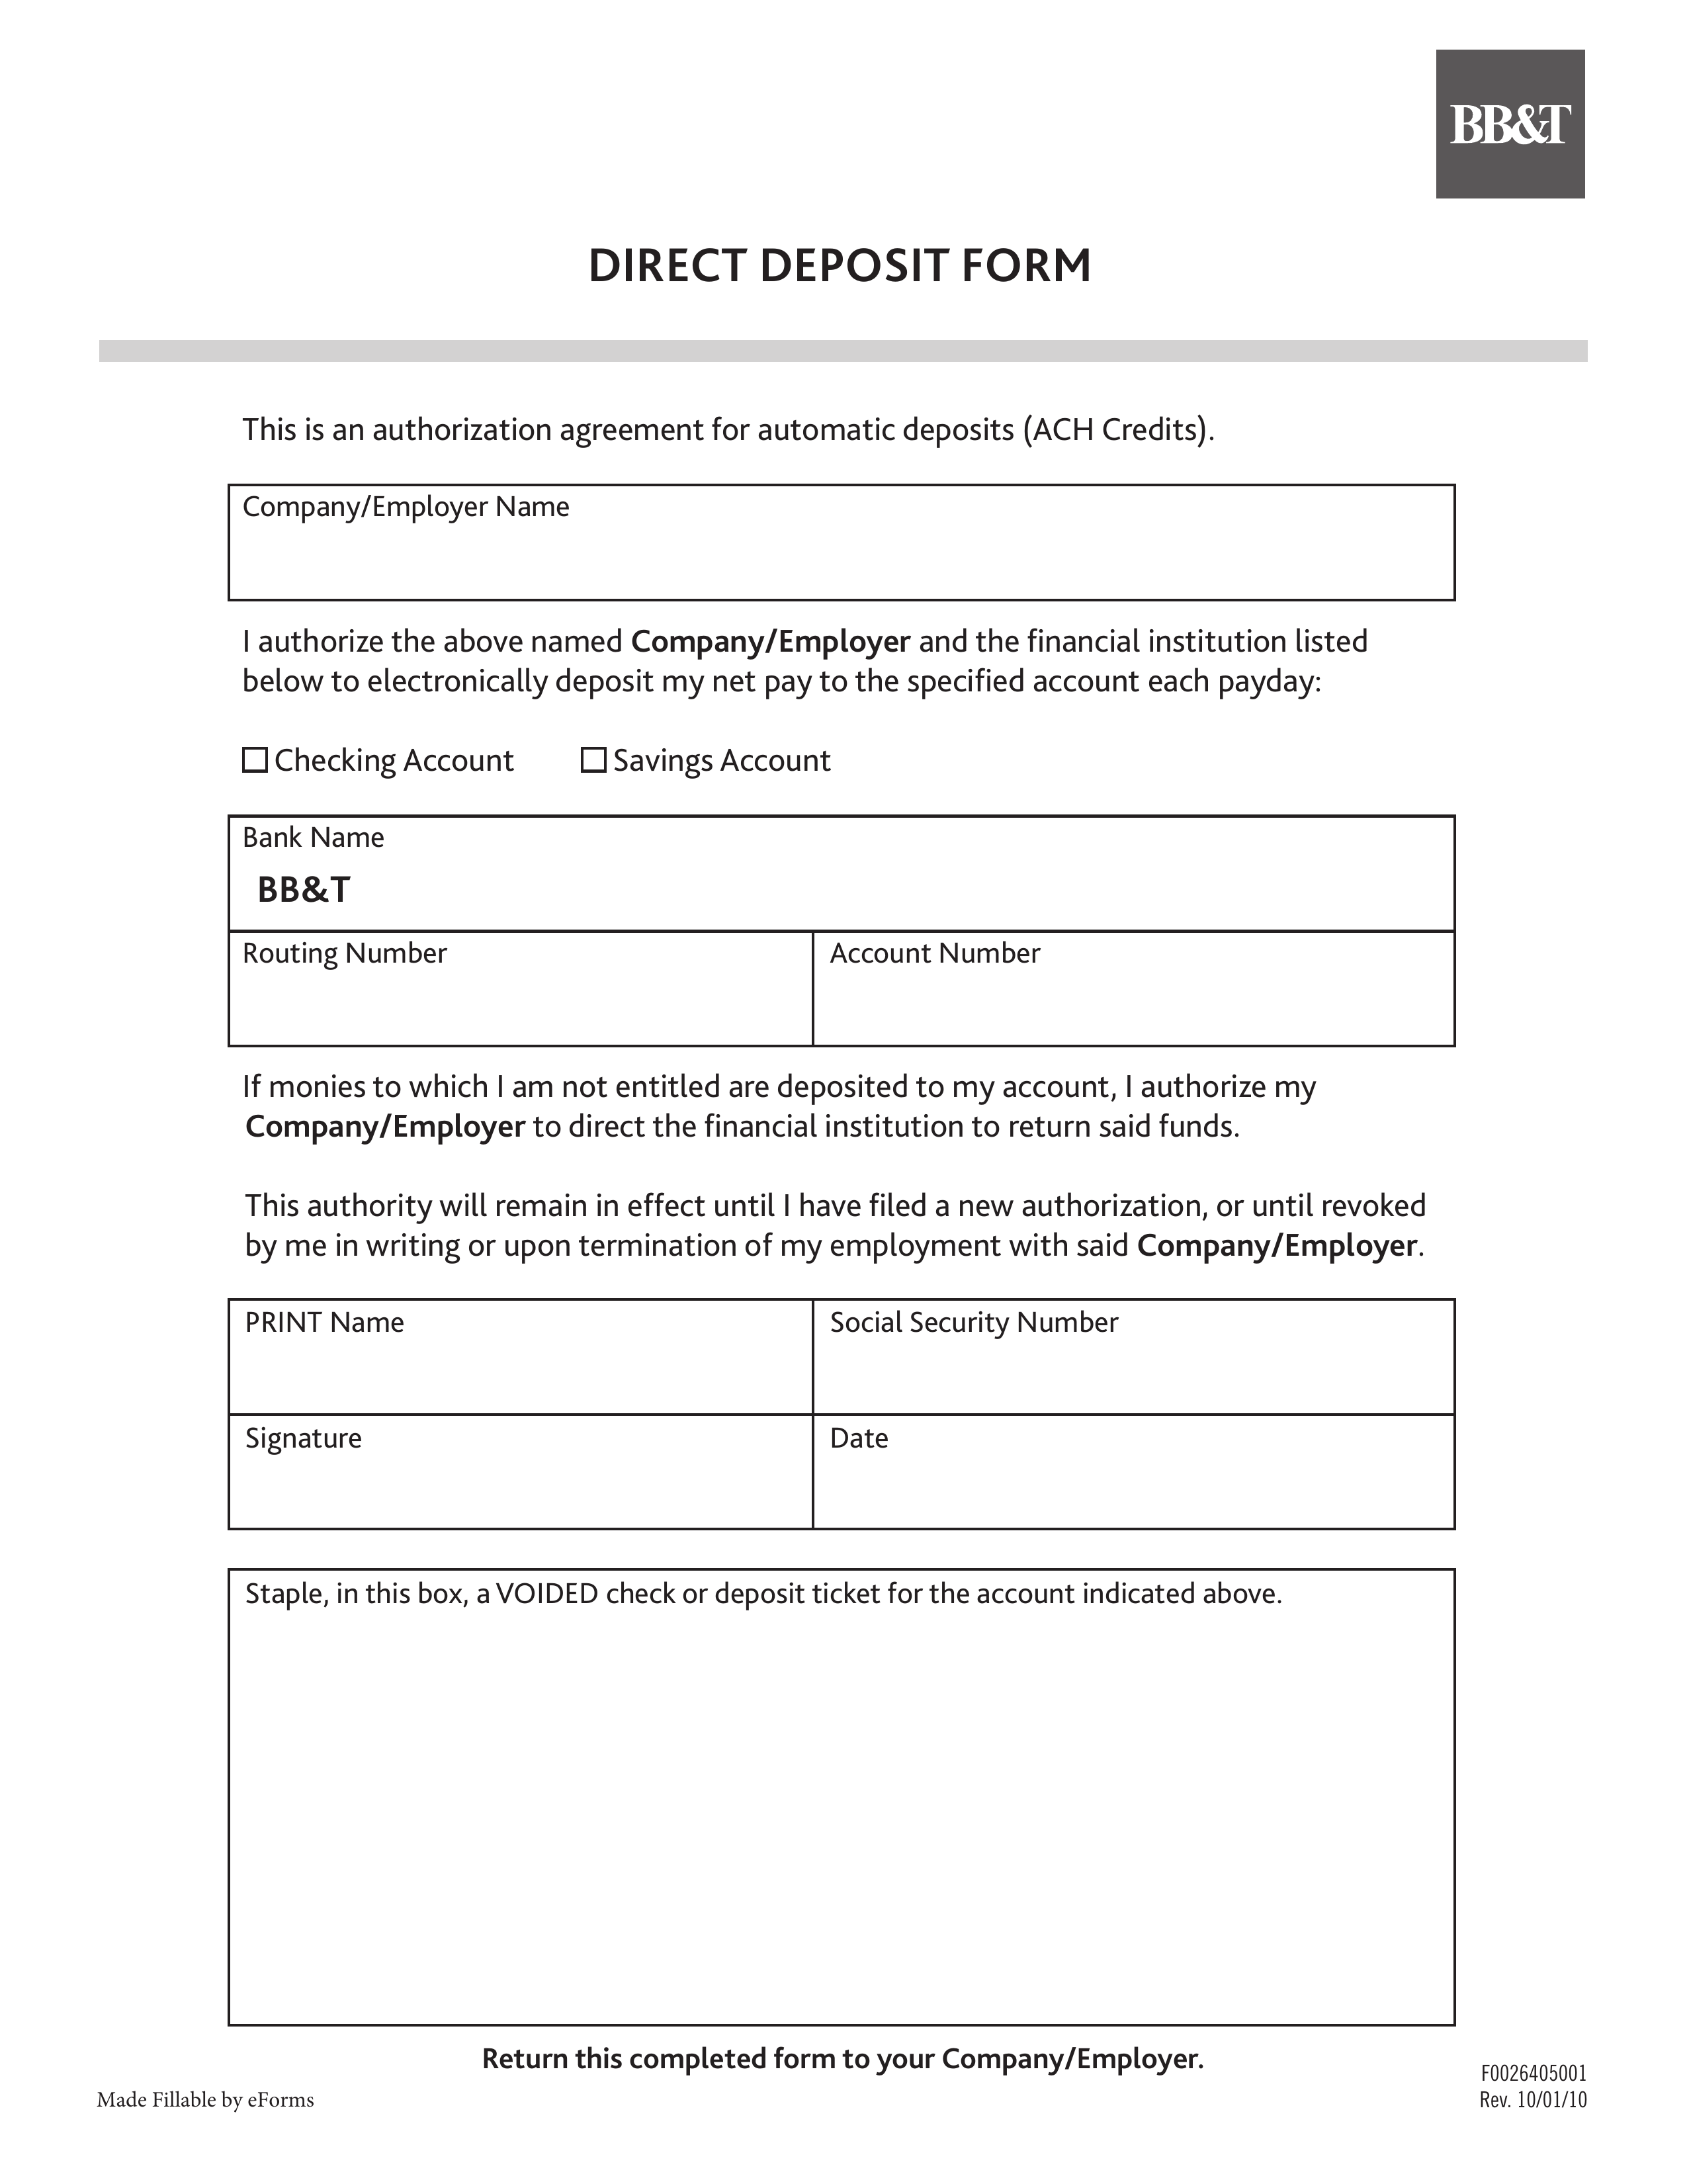 Free BB&T Direct Deposit Authorization Form - PDF – eForms With Direct Deposit Cancellation Form Template Intended For Direct Deposit Cancellation Form Template